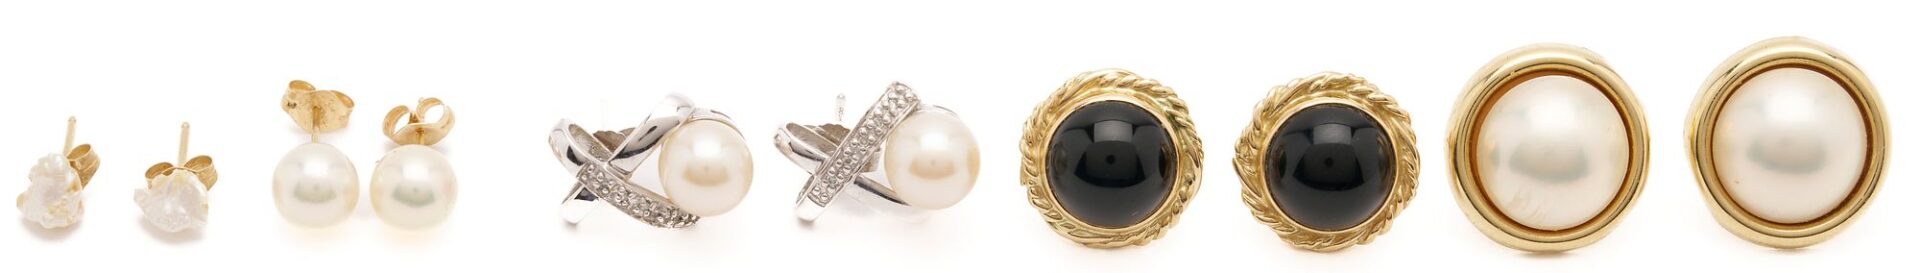 Lot 862: Five (5) Pairs of Gold, Pearl, & Onyx Earrings